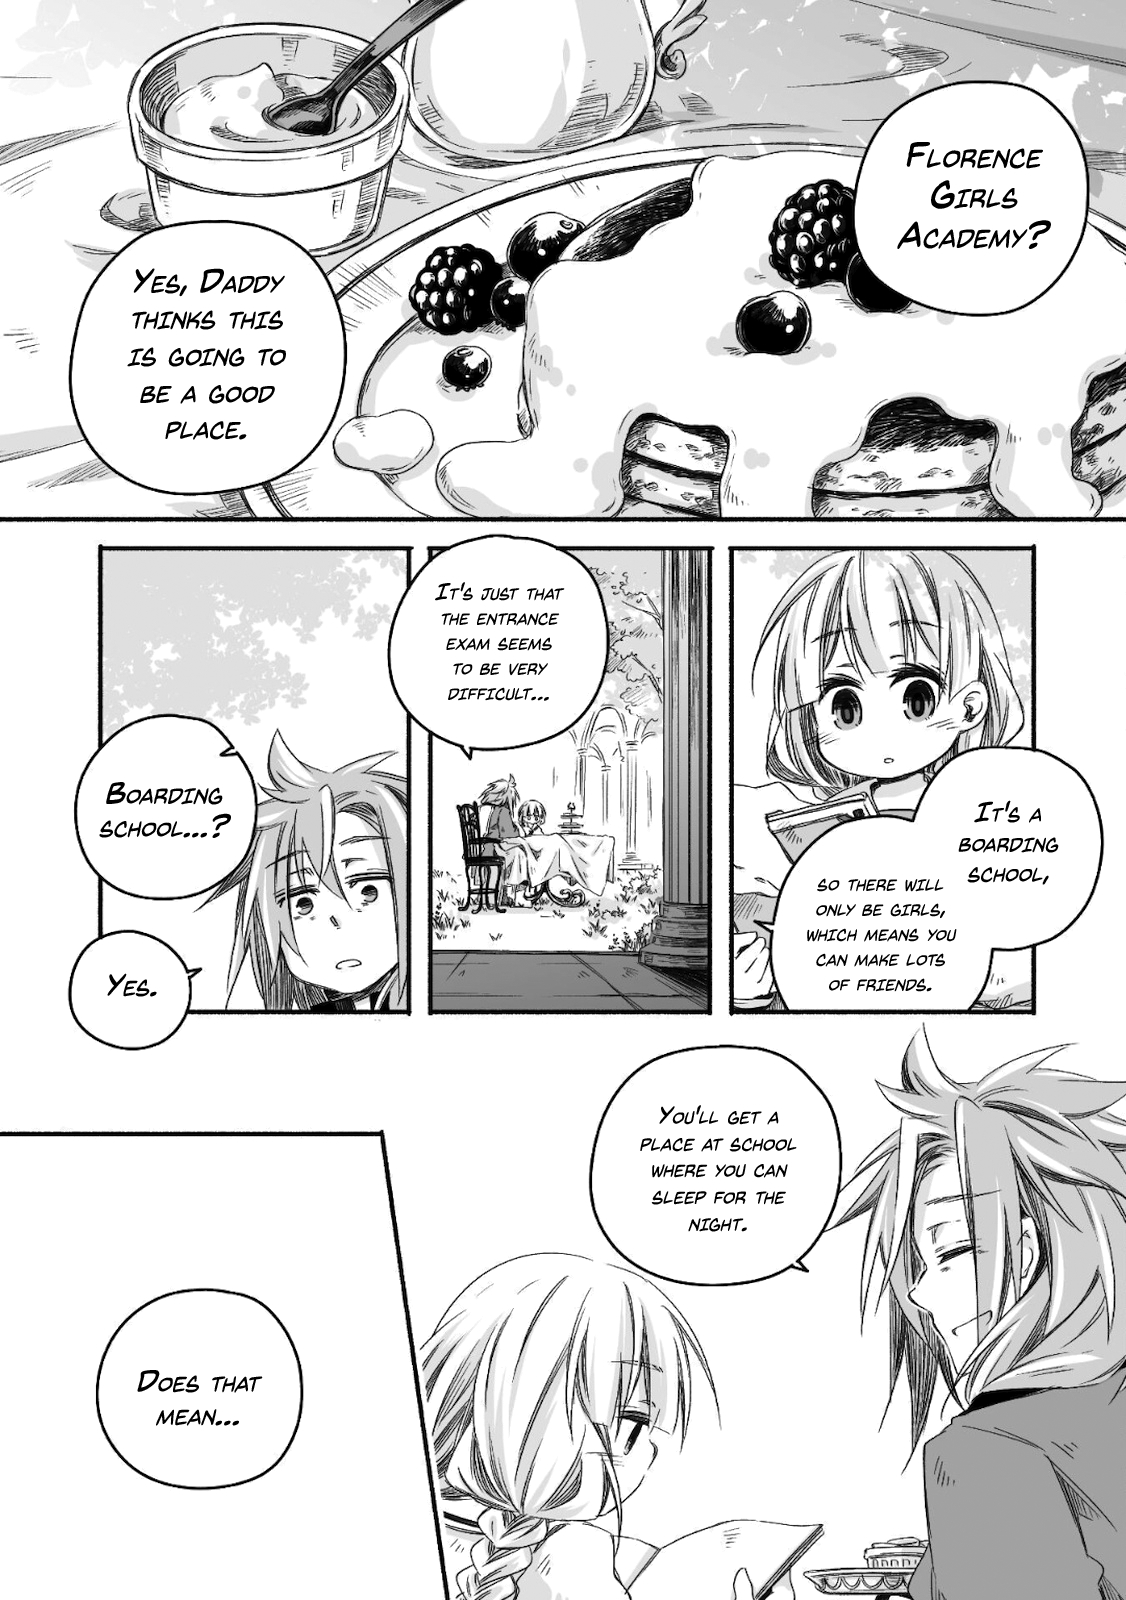 Parenting Diary Of The Strongest Dragon Who Suddenly Became A Dad ～ Cute Daughter, Heartwarming And Growing Up To Be The Strongest In The Human World ～ - 9 page 15-709c0c61